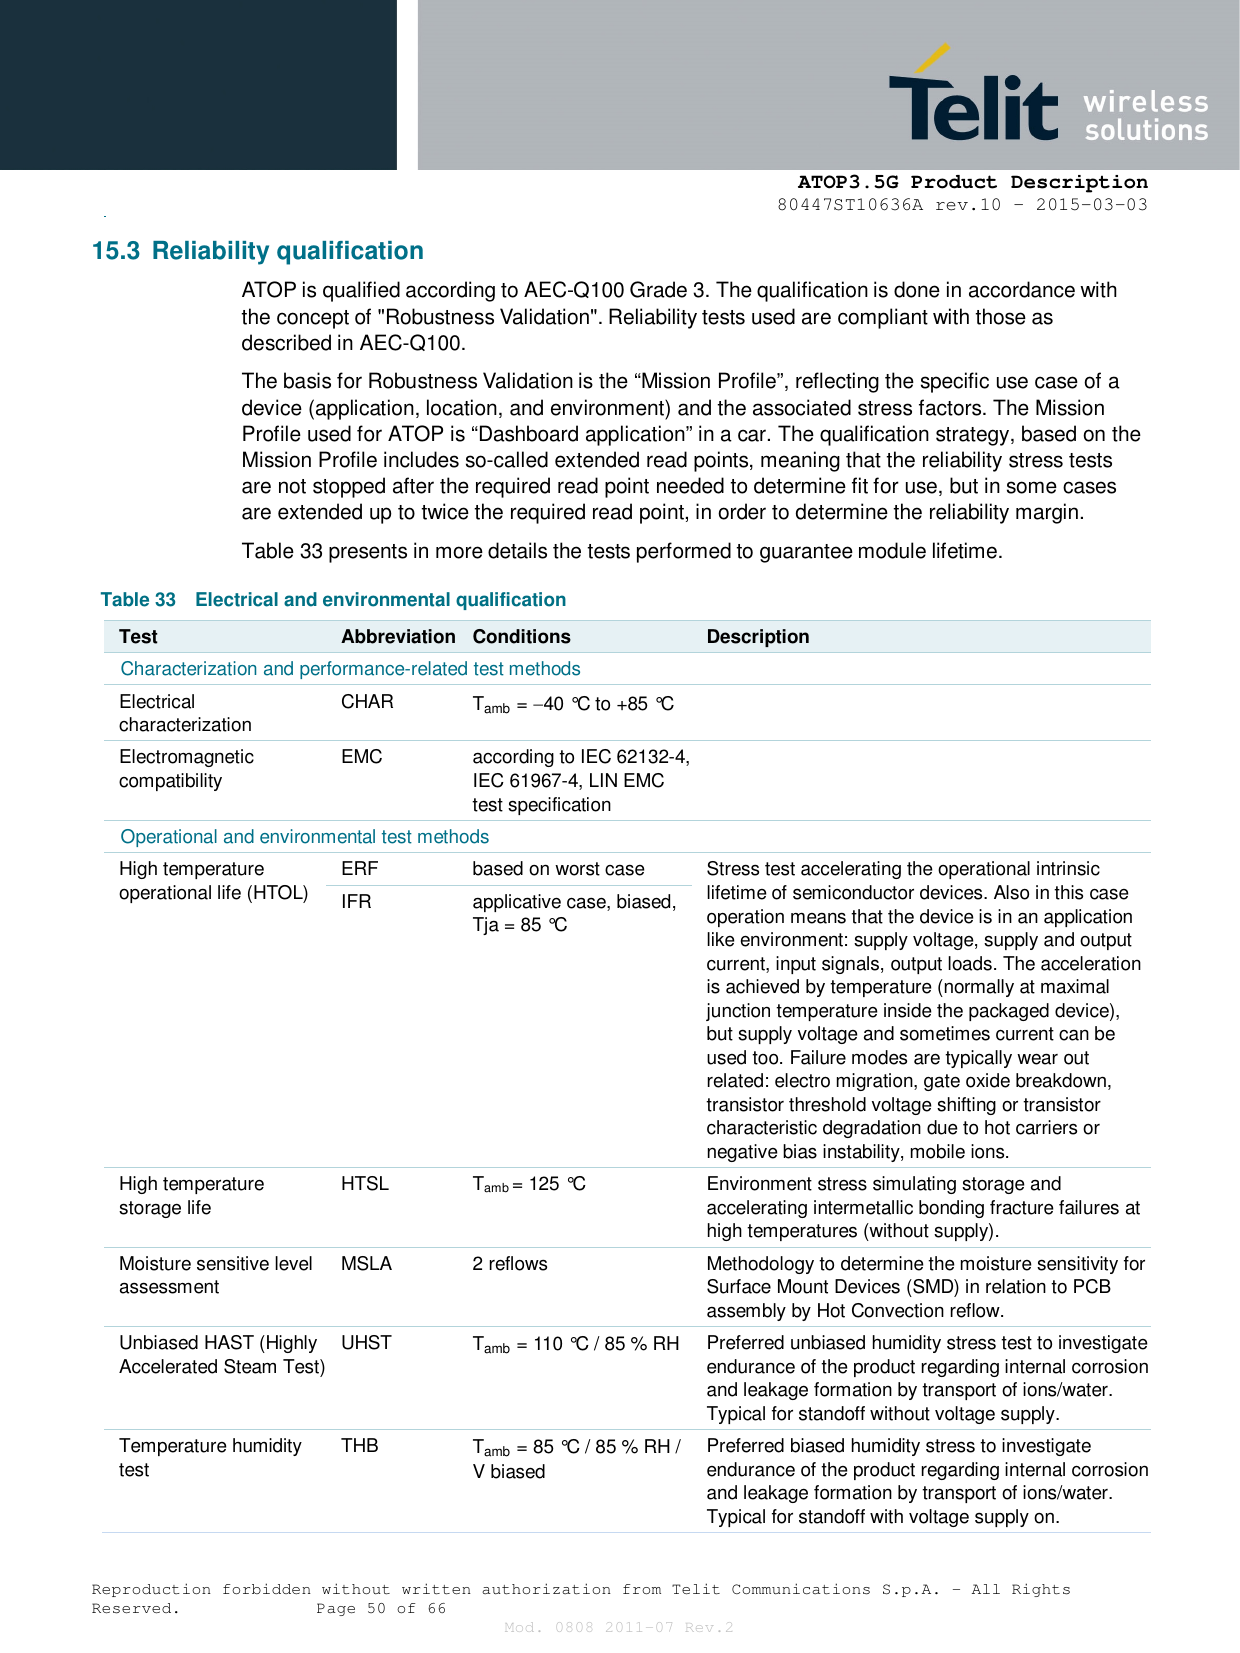      ATOP3.5G Product Description   80447ST10636A rev.10 – 2015-03-03  Reproduction forbidden without written authorization from Telit Communications S.p.A. - All Rights Reserved.    Page 50 of 66 Mod. 0808 2011-07 Rev.2 15.3  Reliability qualification ATOP is qualified according to AEC-Q100 Grade 3. The qualification is done in accordance with the concept of &quot;Robustness Validation&quot;. Reliability tests used are compliant with those as described in AEC-Q100.  The basis for Robustness Validation is the “Mission Profile”, reflecting the specific use case of a device (application, location, and environment) and the associated stress factors. The Mission Profile used for ATOP is “Dashboard application” in a car. The qualification strategy, based on the Mission Profile includes so-called extended read points, meaning that the reliability stress tests are not stopped after the required read point needed to determine fit for use, but in some cases are extended up to twice the required read point, in order to determine the reliability margin. Table 33 presents in more details the tests performed to guarantee module lifetime. Table 33  Electrical and environmental qualification Test Abbreviation Conditions Description Characterization and performance-related test methods Electrical characterization  CHAR  Tamb  = 40 °C to +85 °C   Electromagnetic compatibility EMC  according to IEC 62132-4, IEC 61967-4, LIN EMC test specification  Operational and environmental test methods High temperature operational life (HTOL) ERF  based on worst case  Stress test accelerating the operational intrinsic lifetime of semiconductor devices. Also in this case operation means that the device is in an application like environment: supply voltage, supply and output current, input signals, output loads. The acceleration is achieved by temperature (normally at maximal junction temperature inside the packaged device), but supply voltage and sometimes current can be used too. Failure modes are typically wear out related: electro migration, gate oxide breakdown, transistor threshold voltage shifting or transistor characteristic degradation due to hot carriers or negative bias instability, mobile ions. IFR  applicative case, biased, Tja = 85 °C High temperature storage life  HTSL  Tamb = 125 °C  Environment stress simulating storage and accelerating intermetallic bonding fracture failures at high temperatures (without supply). Moisture sensitive level assessment  MSLA  2 reflows  Methodology to determine the moisture sensitivity for Surface Mount Devices (SMD) in relation to PCB assembly by Hot Convection reflow. Unbiased HAST (Highly Accelerated Steam Test)  UHST  Tamb  = 110 °C / 85 % RH  Preferred unbiased humidity stress test to investigate endurance of the product regarding internal corrosion and leakage formation by transport of ions/water. Typical for standoff without voltage supply. Temperature humidity test  THB  Tamb  = 85 °C / 85 % RH / V biased Preferred biased humidity stress to investigate endurance of the product regarding internal corrosion and leakage formation by transport of ions/water. Typical for standoff with voltage supply on. 